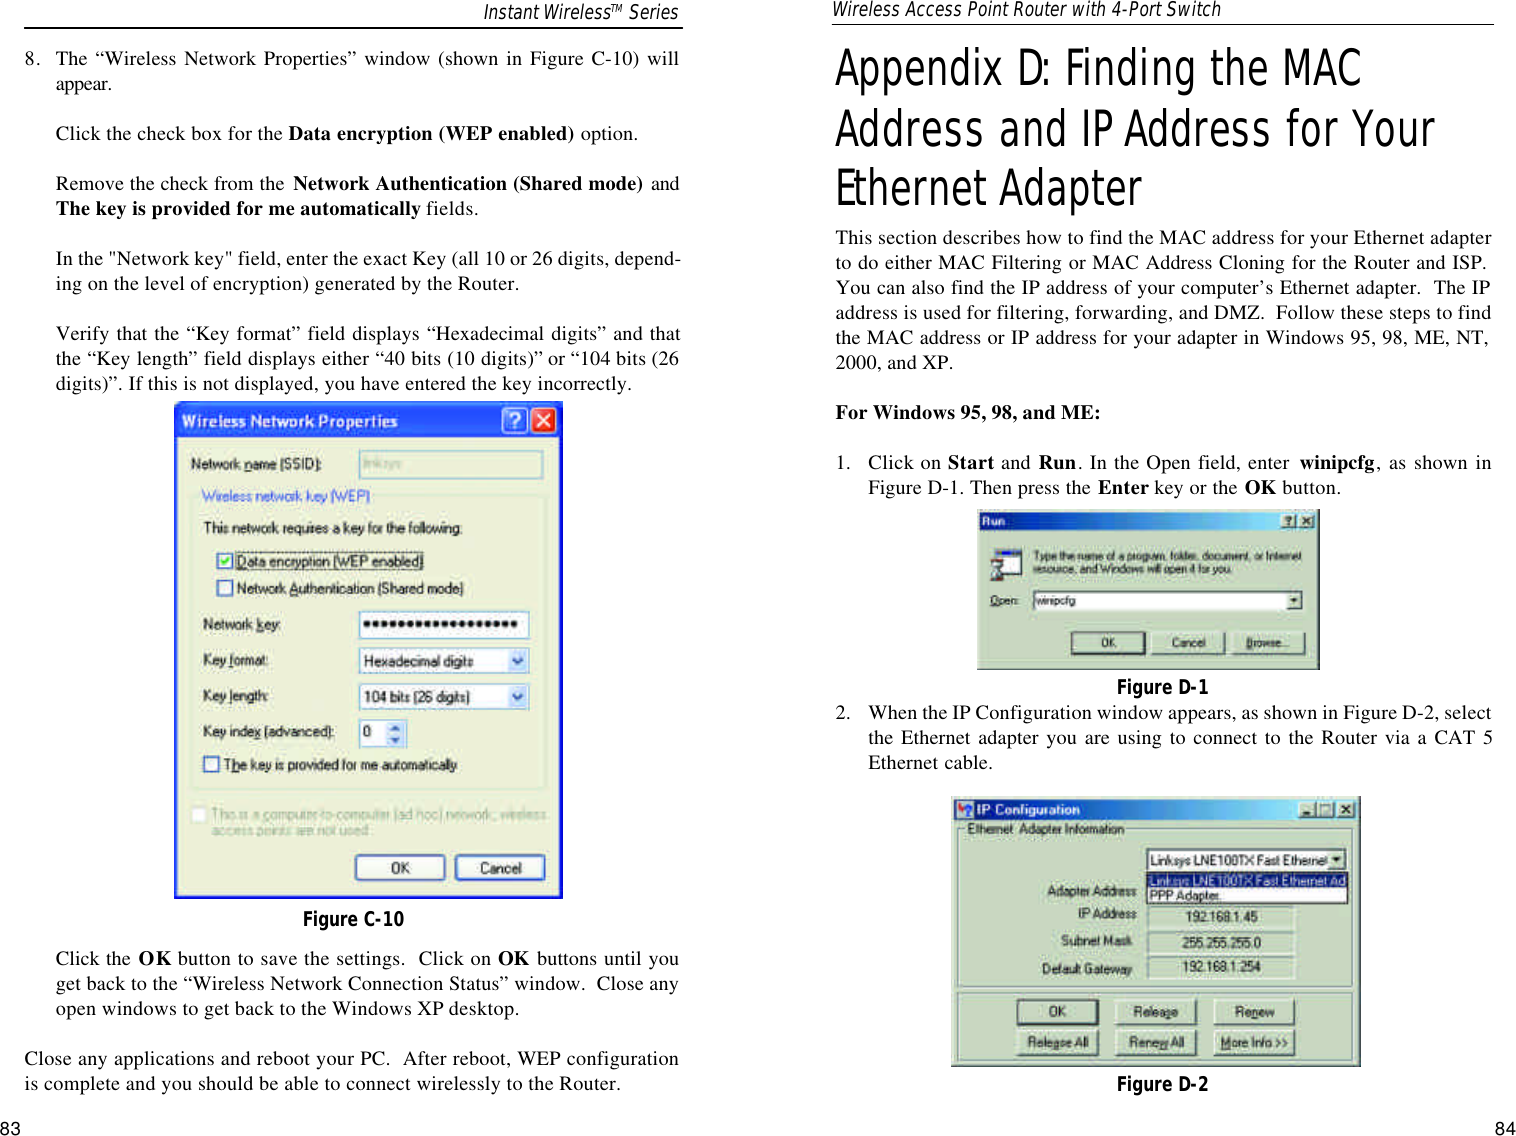 Appendix D: Finding the MACAddress and IPAddress for YourEthernet AdapterThis section describes how to find the MAC address for your Ethernet adapterto do either MAC Filtering or MAC Address Cloning for the Router and ISP.You can also find the IP address of your computer’s Ethernet adapter.  The IPaddress is used for filtering, forwarding, and DMZ.  Follow these steps to findthe MAC address or IP address for your adapter in Windows 95, 98, ME, NT,2000, and XP. For Windows 95, 98, and ME:1.  Click on Start and  Run. In the Open field, enter  winipcfg, as shown inFigure D-1. Then press the Enter key or the OK button.2.  When the IP Configuration window appears, as shown in Figure D-2, selectthe Ethernet adapter you are using to connect to the Router via a CAT 5Ethernet cable.Figure D-1Figure D-28. The “Wireless Network Properties” window (shown in Figure C-10) willappear.Click the check box for the Data encryption (WEP enabled) option.Remove the check from the  Network Authentication (Shared mode) andThe key is provided for me automatically fields. In the &quot;Network key&quot; field, enter the exact Key (all 10 or 26 digits, depend-ing on the level of encryption) generated by the Router.Verify that the “Key format” field displays “Hexadecimal digits” and thatthe “Key length” field displays either “40 bits (10 digits)” or “104 bits (26digits)”. If this is not displayed, you have entered the key incorrectly.Click the OK button to save the settings.  Click on OK buttons until youget back to the “Wireless Network Connection Status” window.  Close anyopen windows to get back to the Windows XP desktop.Close any applications and reboot your PC.  After reboot, WEP configurationis complete and you should be able to connect wirelessly to the Router.Figure C-10Instant WirelessTM Series Wireless Access Point Router with 4-Port Switch83 84